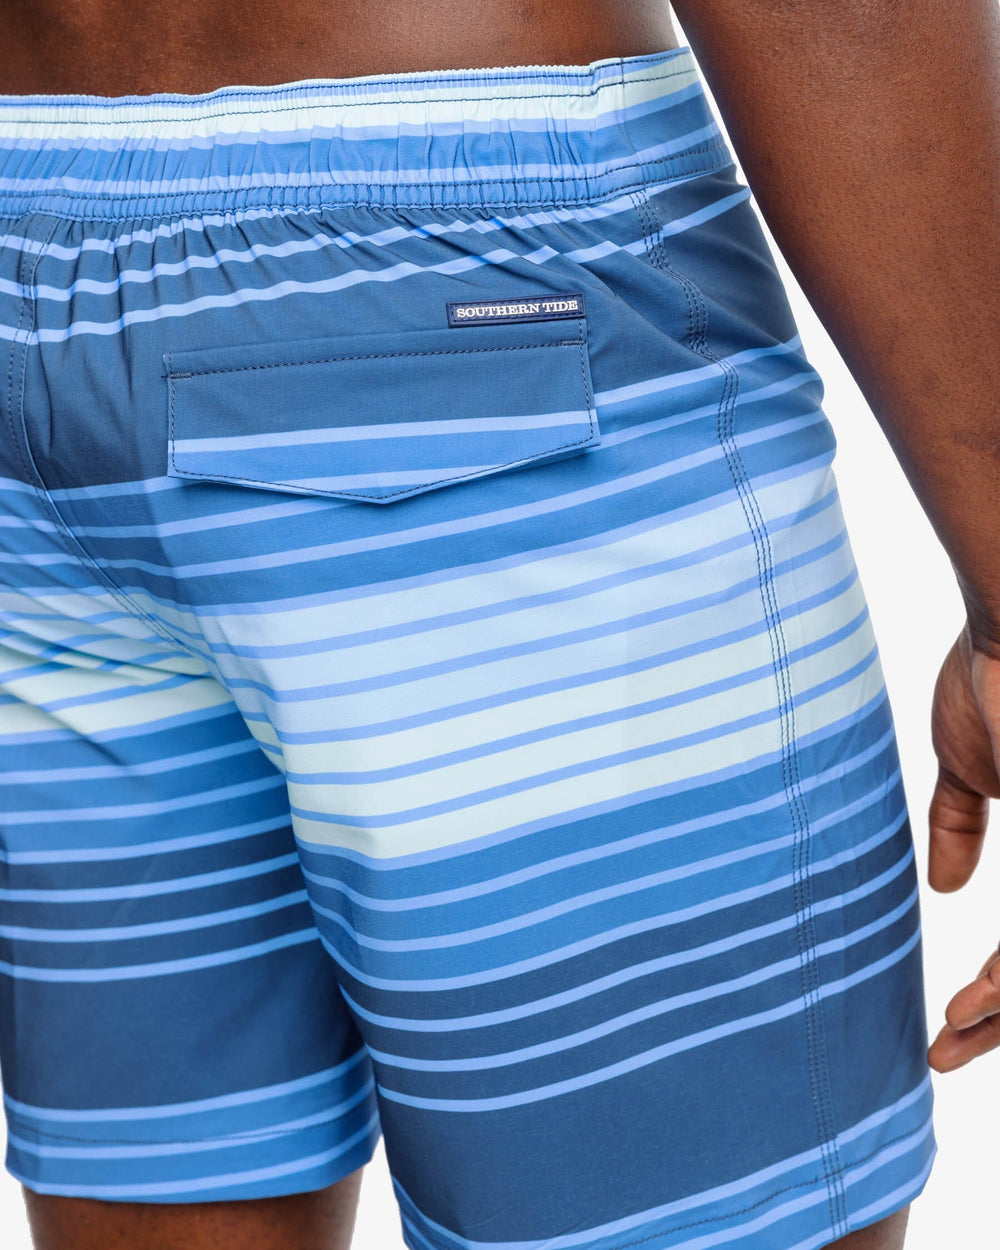 The detail view of the Southern Tide Wateree Stripe Printed Swim Short by Southern Tide - Aged Denim